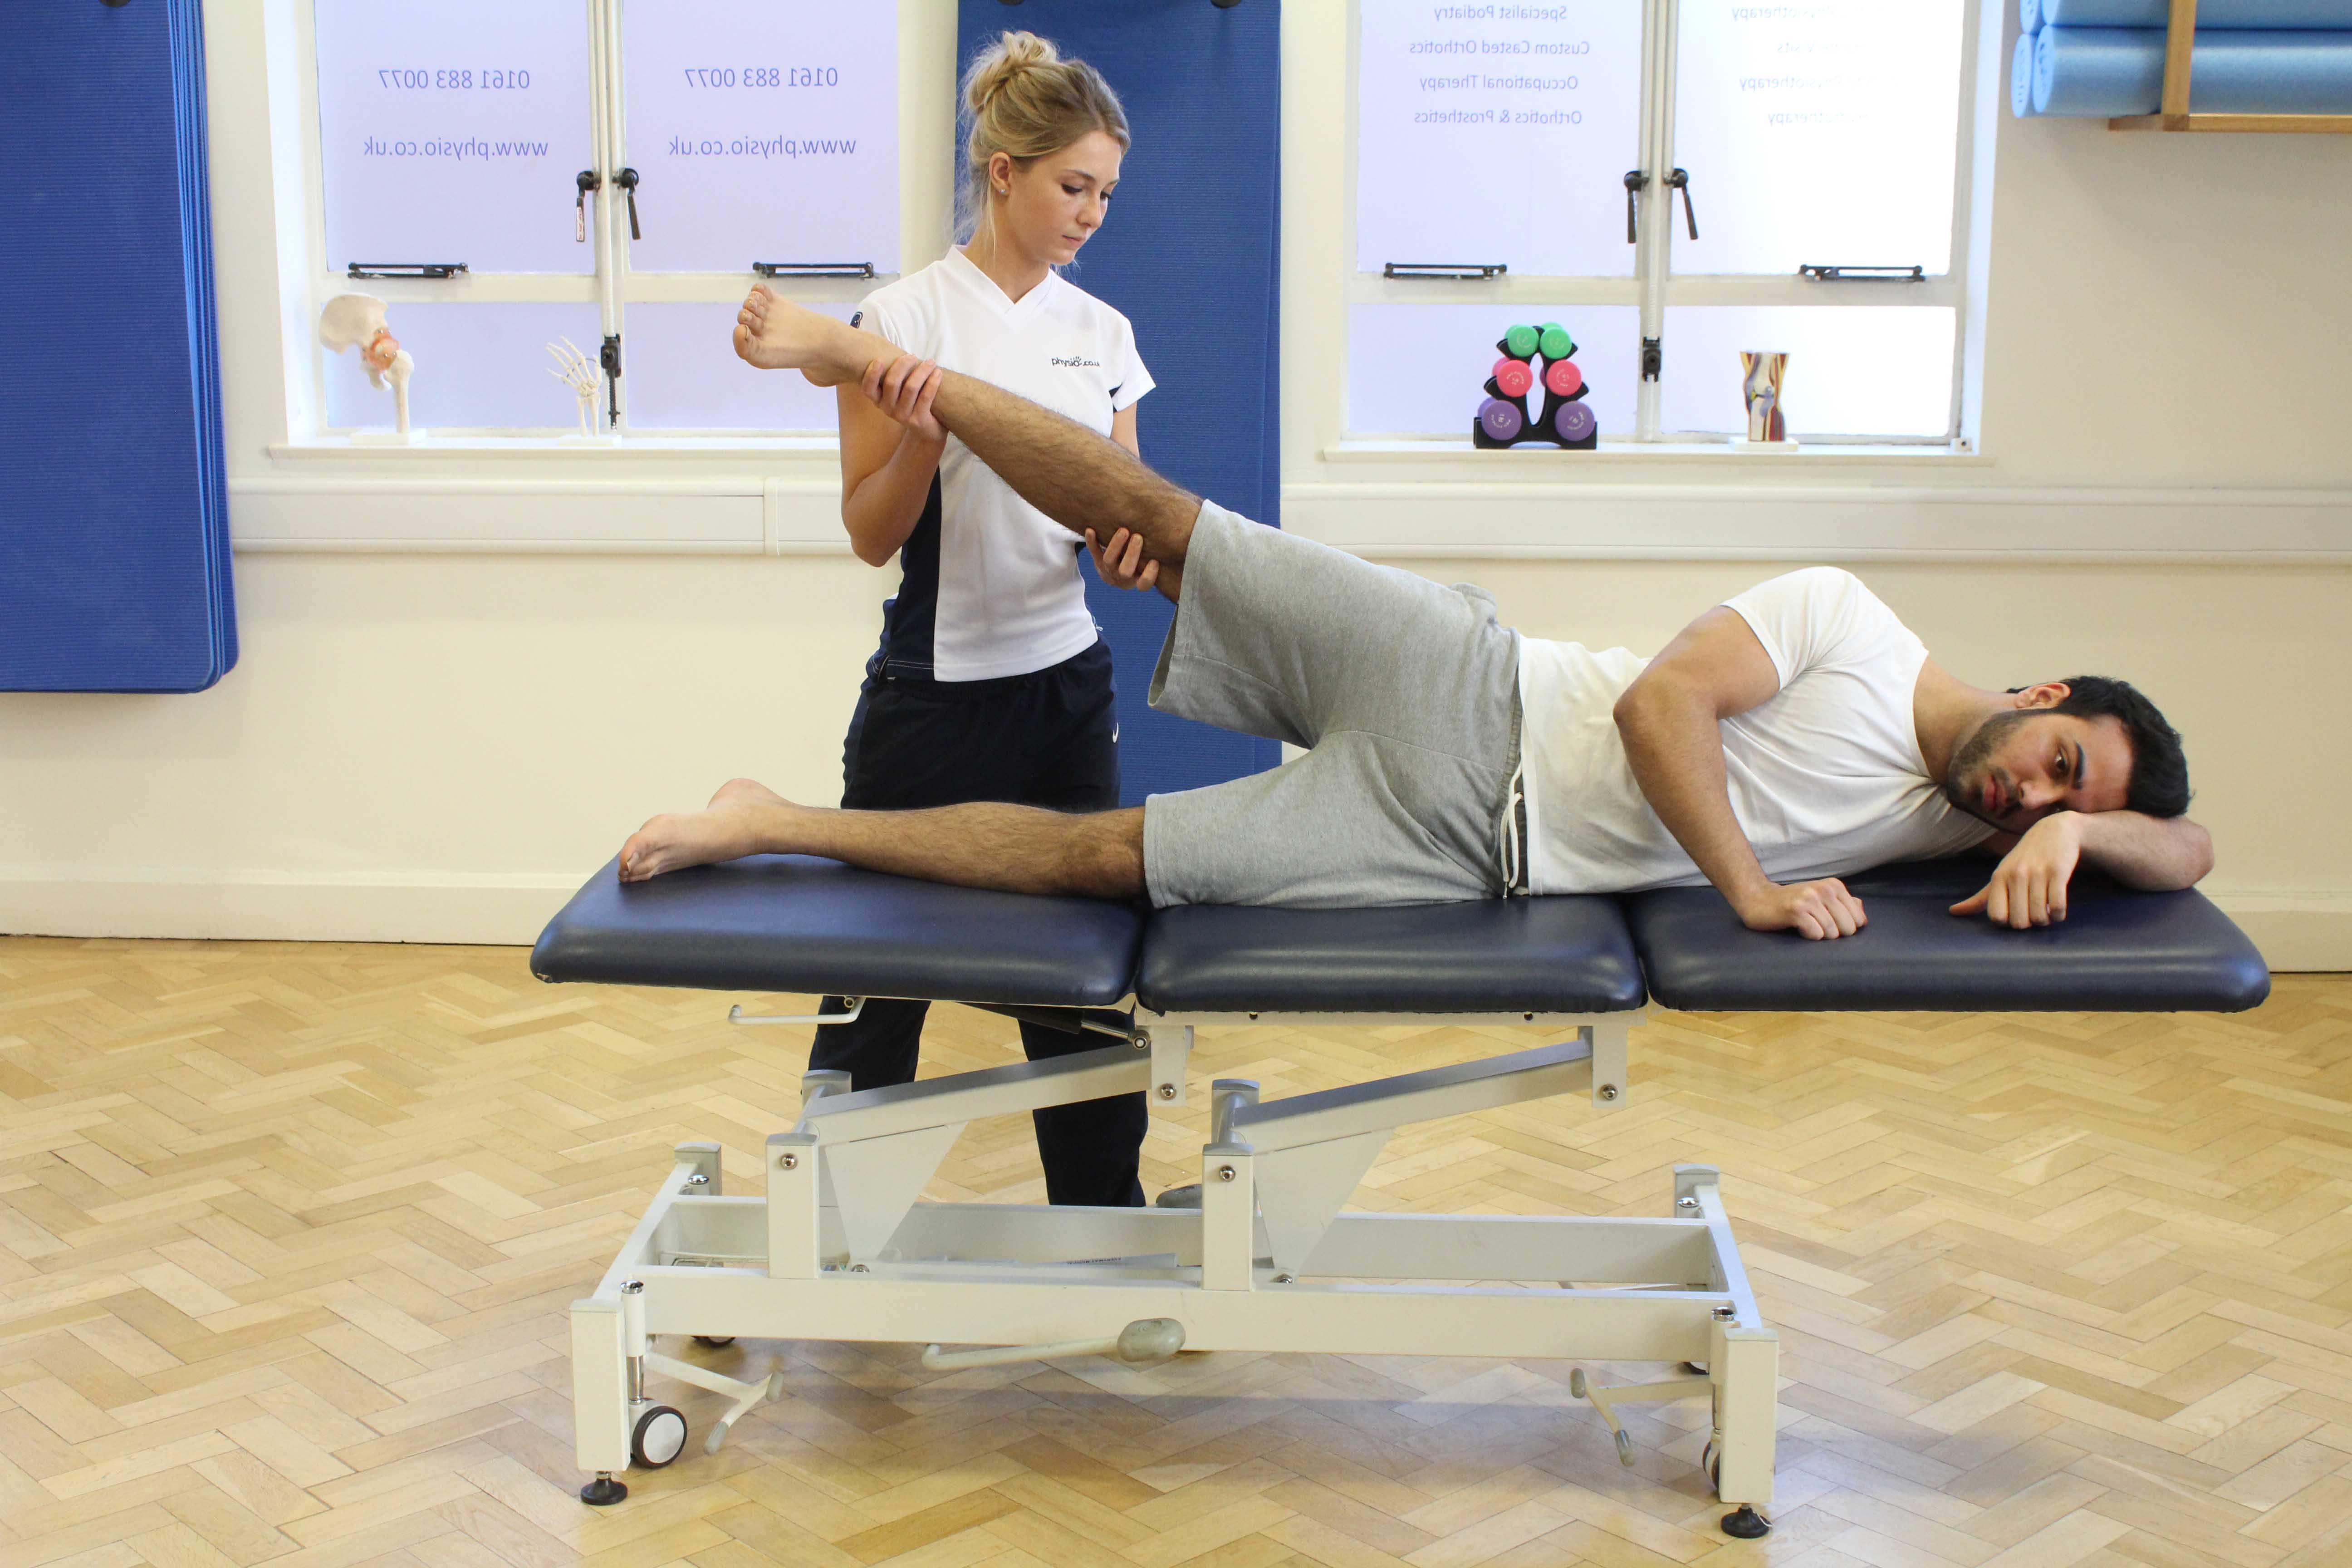 Progressive strengthening hip exercises supervised by experienced therapist